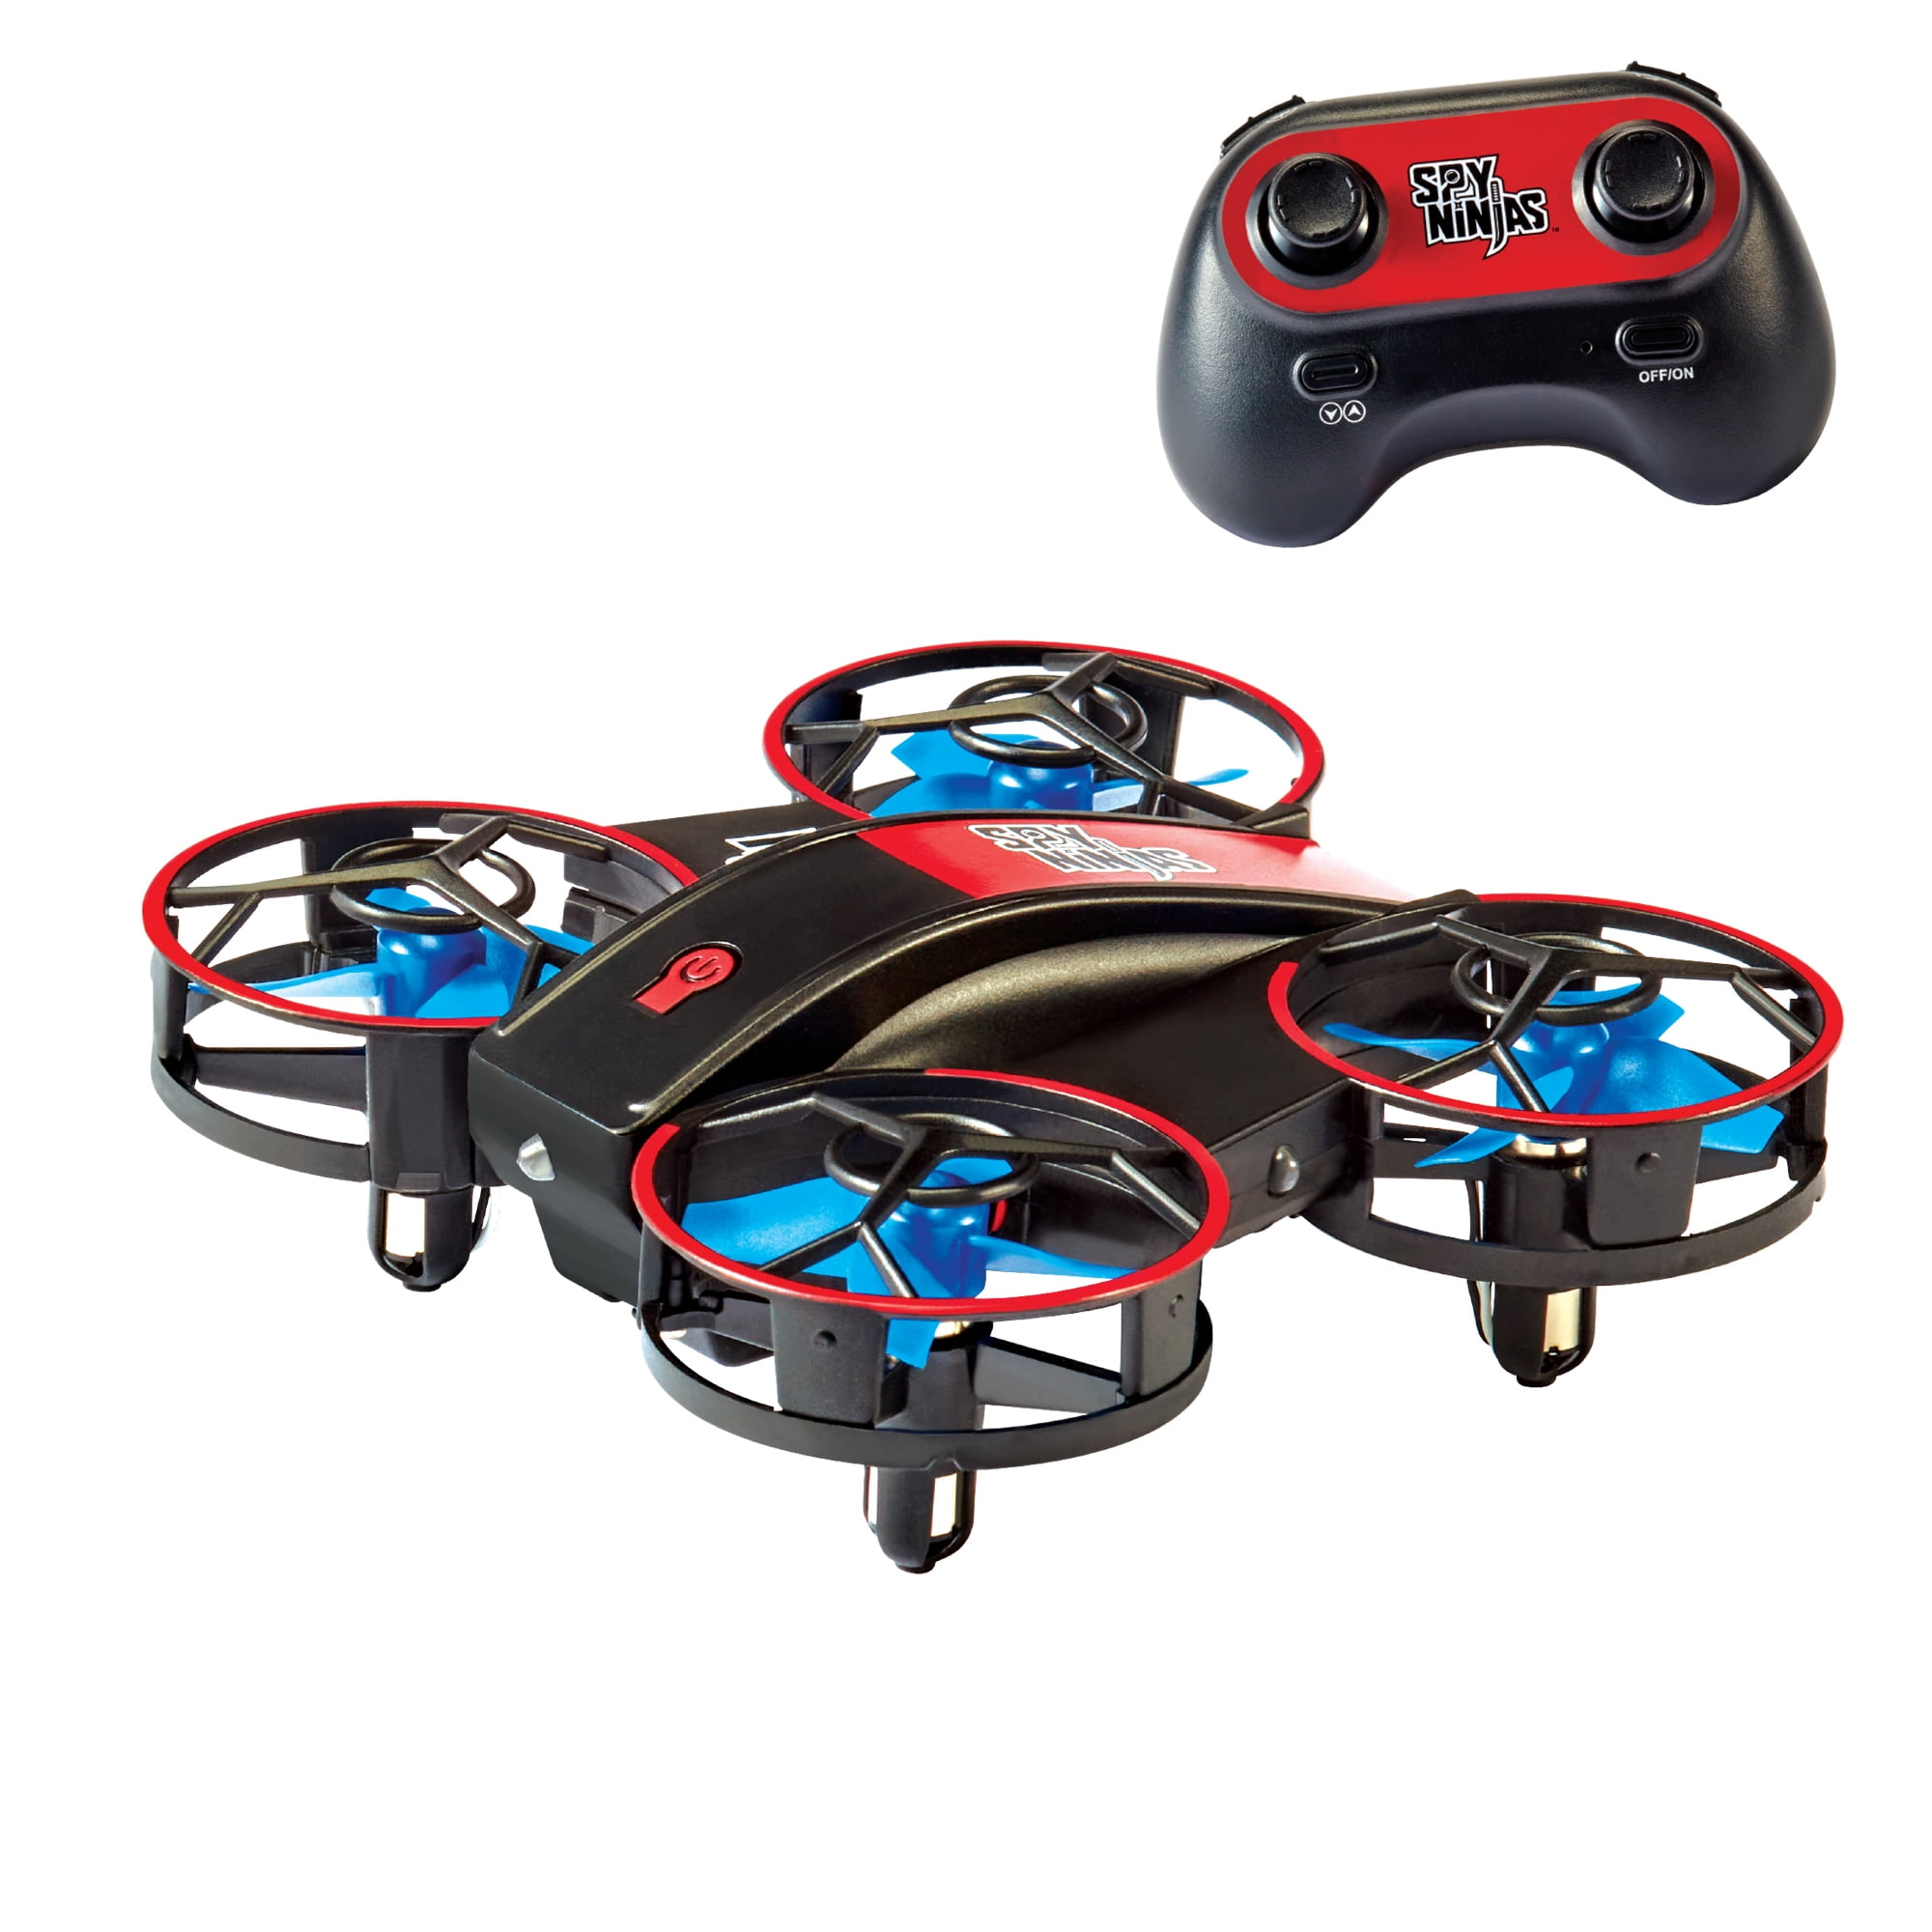 Spy Ninjas Remote Controlled High-Flying Gizmo Drone with Rechargeable Battery